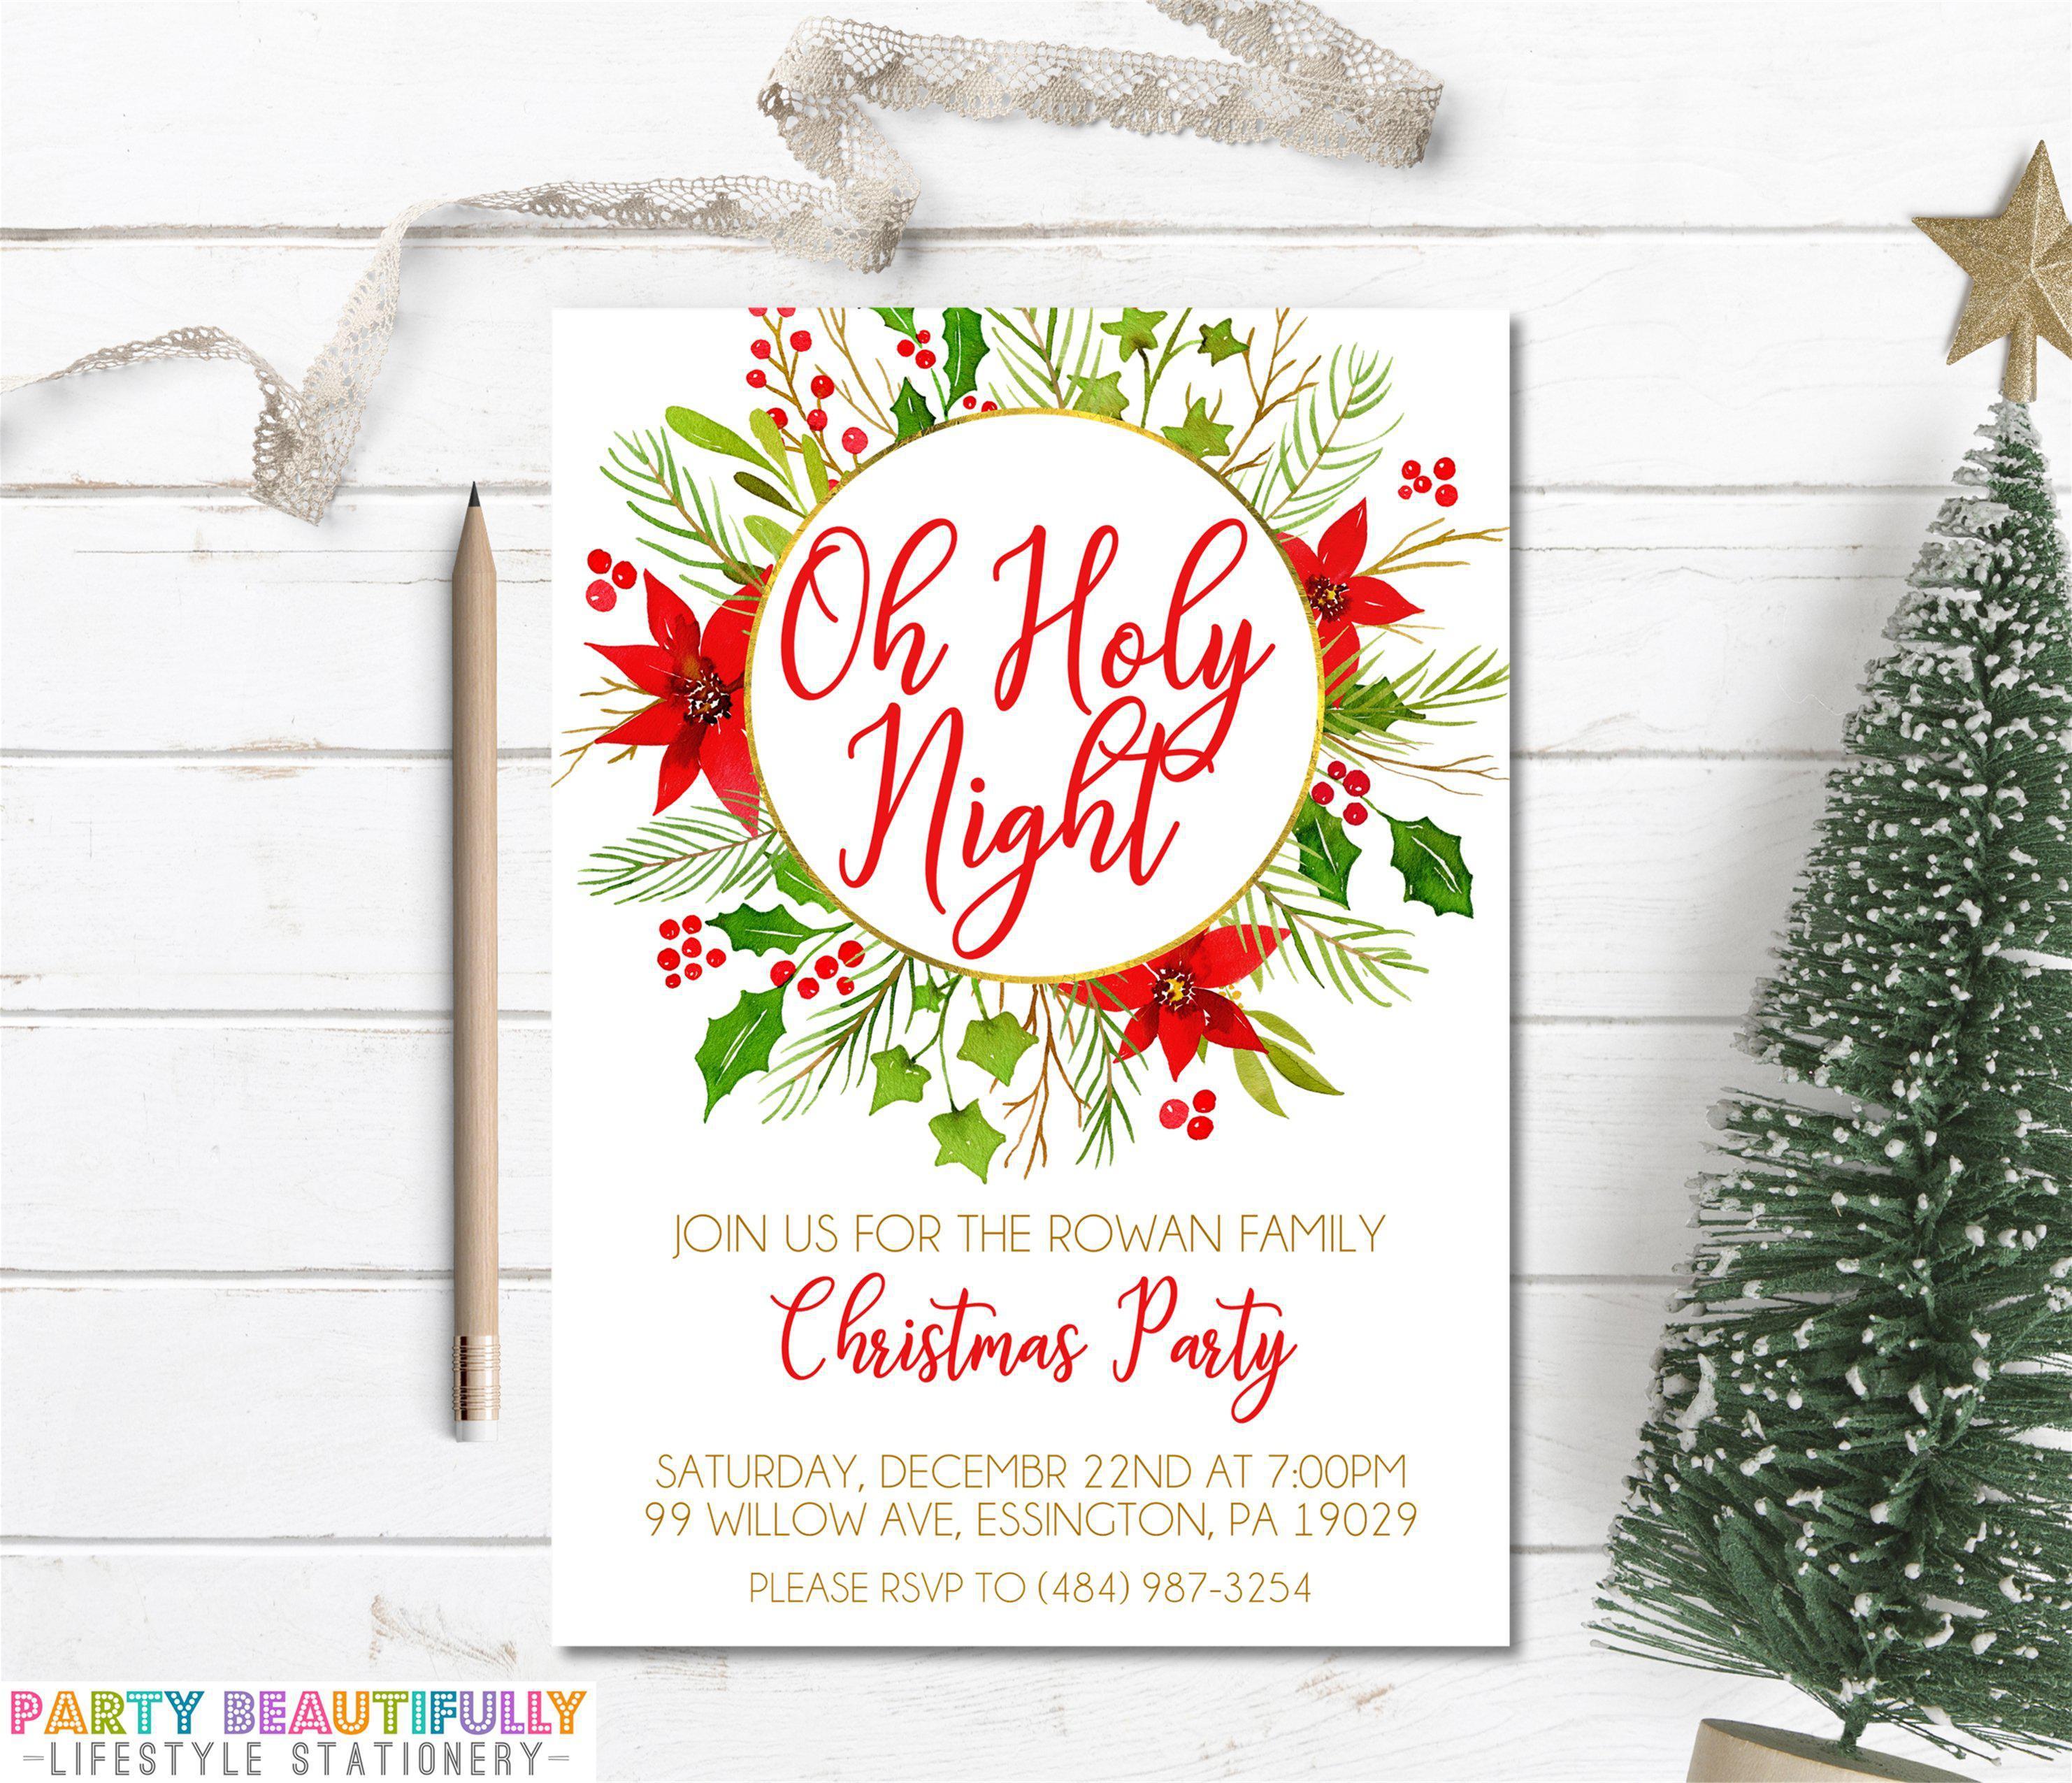 Oh Holy Night Christmas Party Invitations